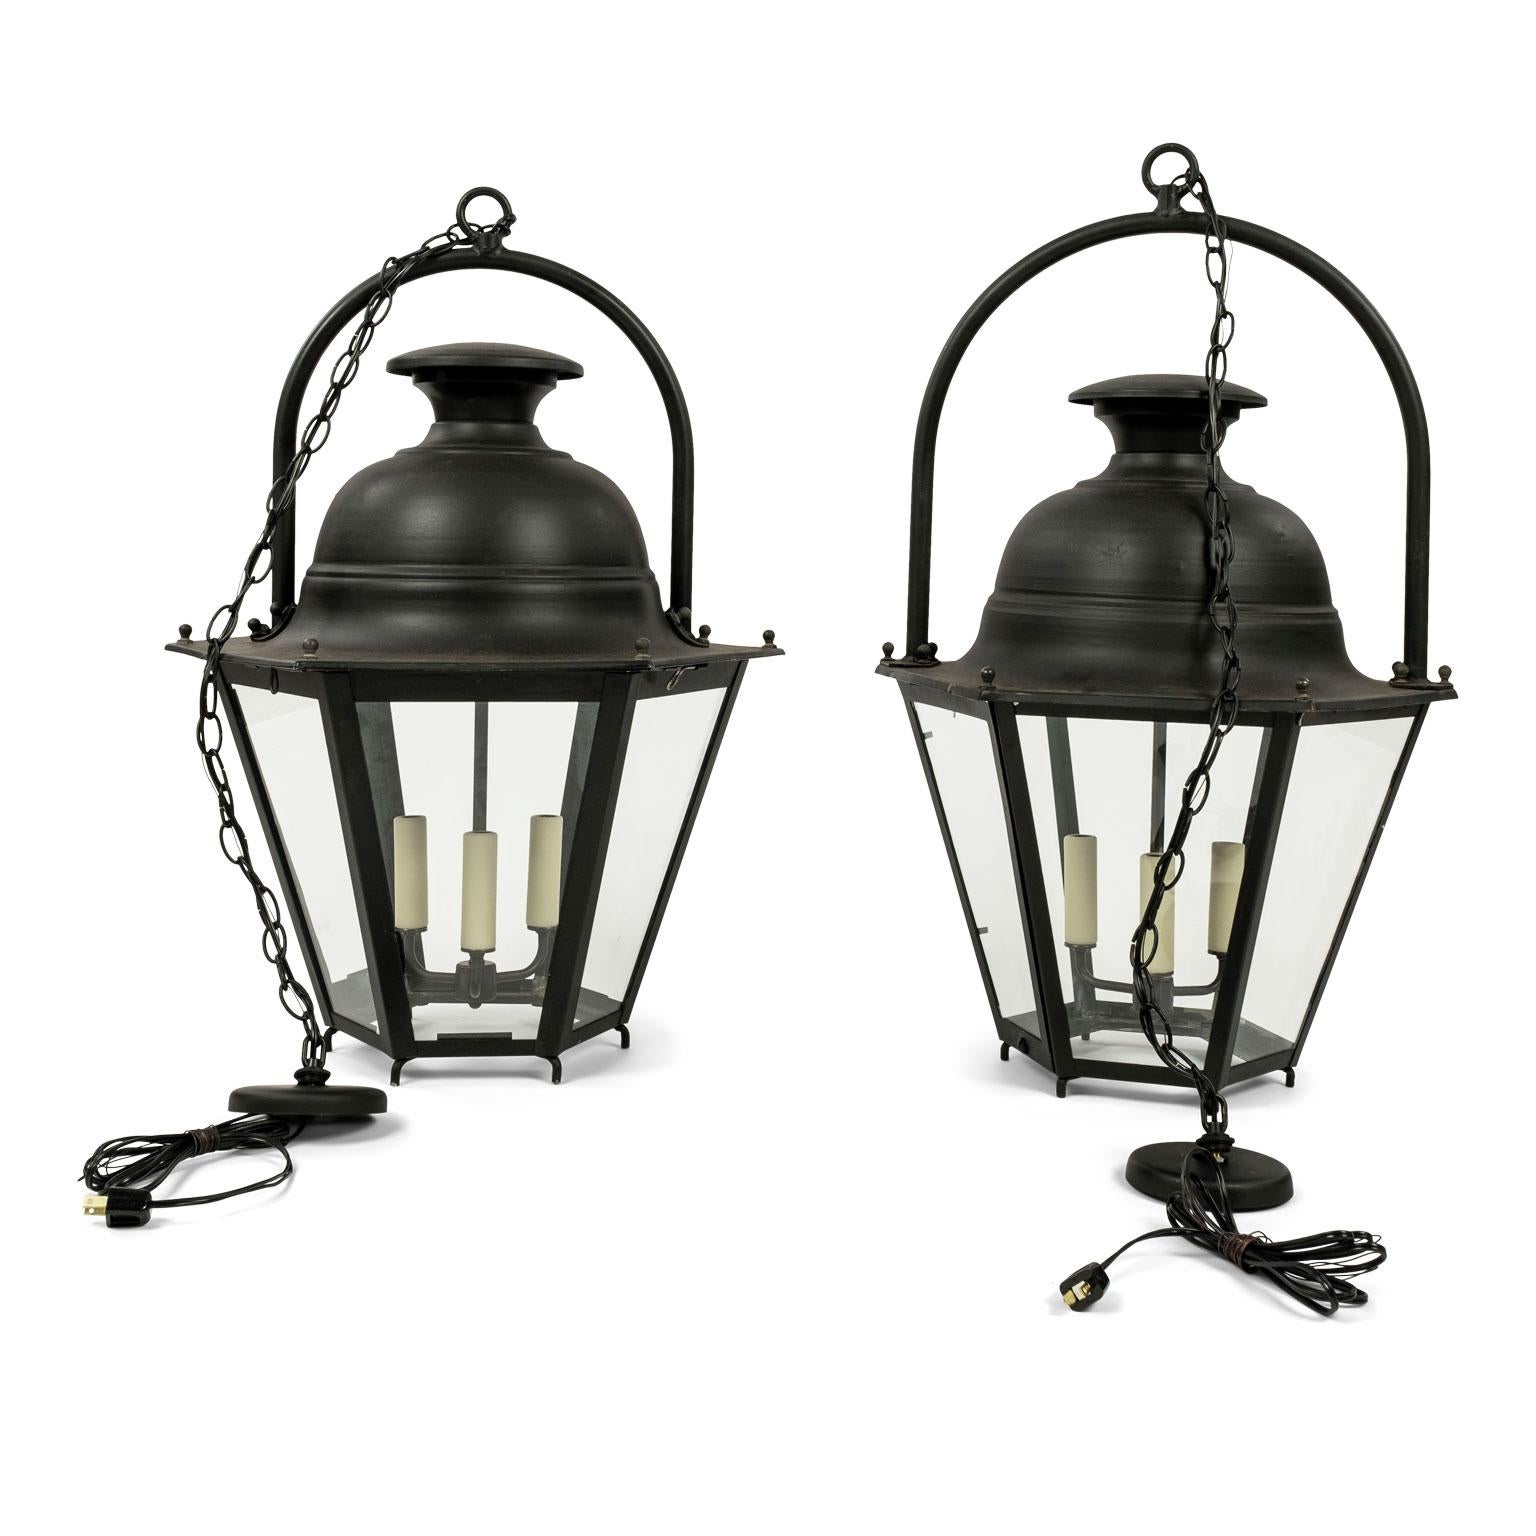 Vintage black-painted hexagonal street lantern from the South of France. Newly wired for use within the USA using UL listed parts. Includes chain and canopy (listed height does not include chain). Five available and sold individually at $4,800